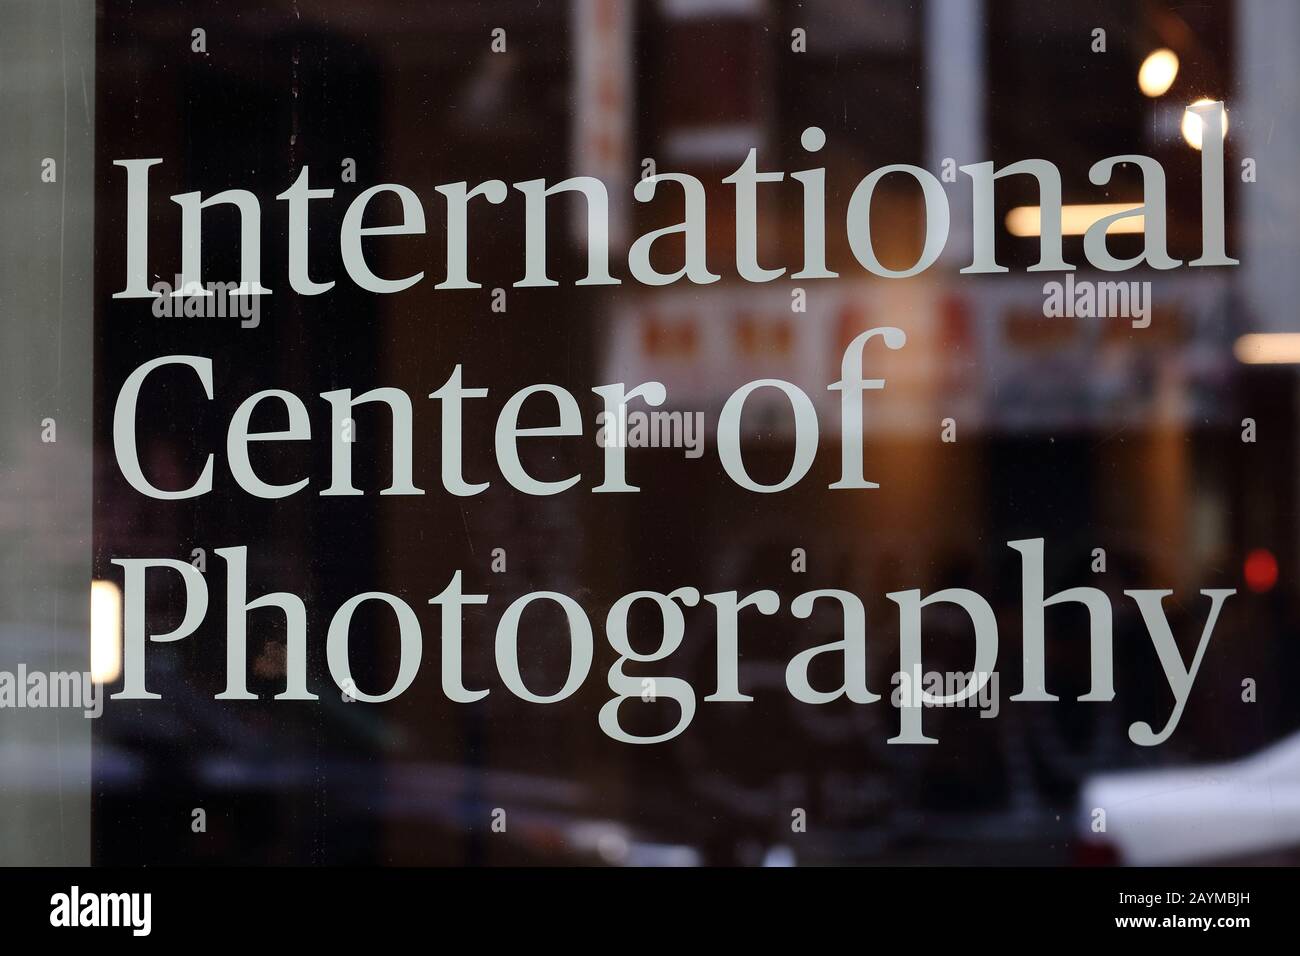 International Center of Photography signage, 79 Essex St, New York, NY. in the Lower East Side of Manhattan Stock Photo